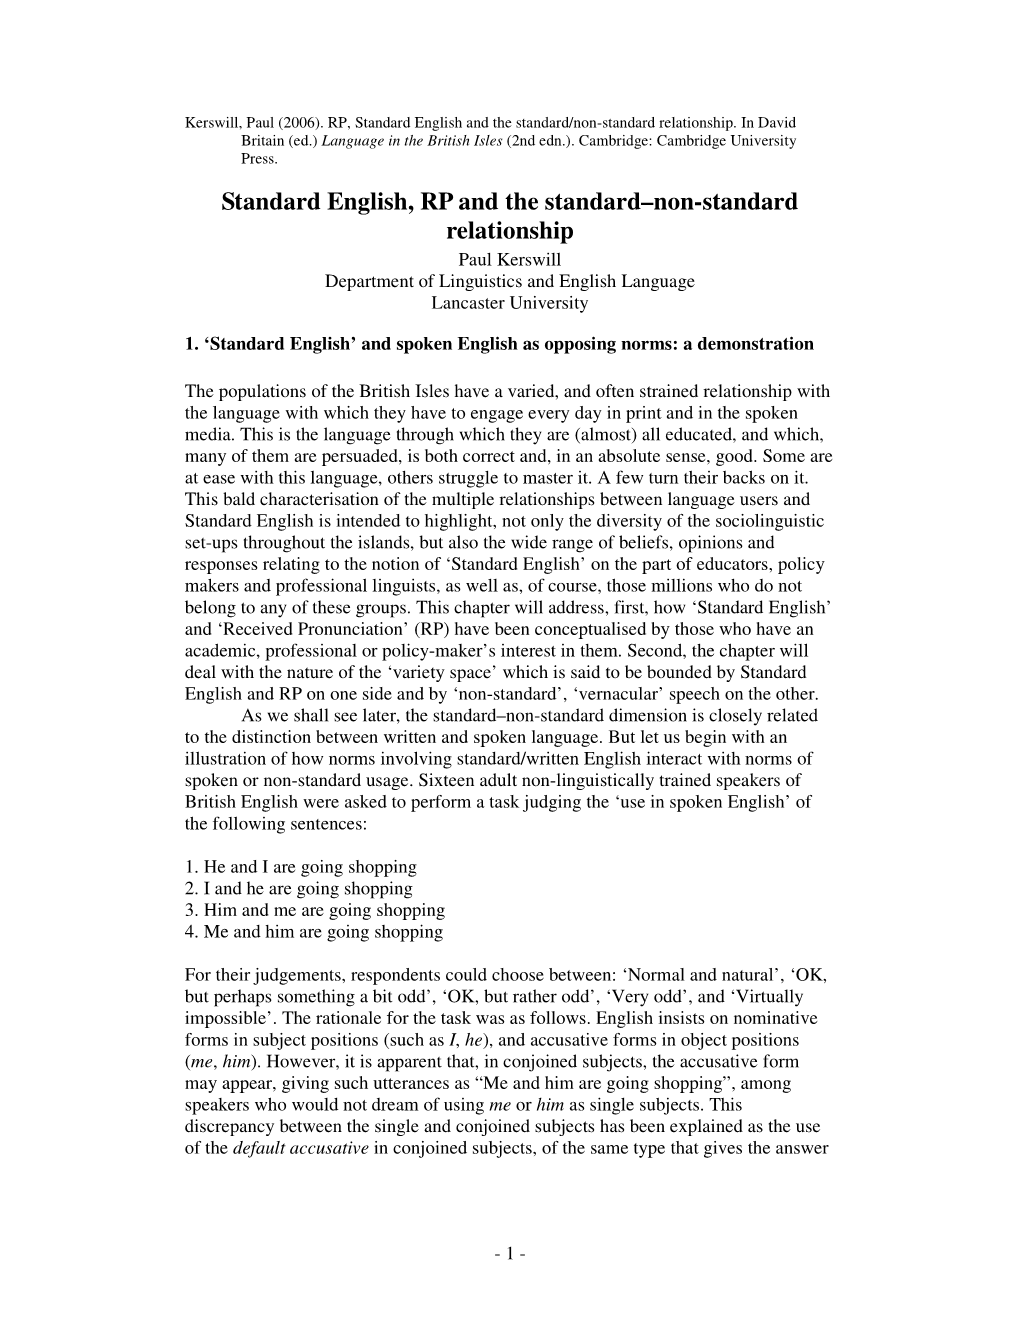 Standard English, RP and the Standard–Non-Standard Relationship Paul Kerswill Department of Linguistics and English Language Lancaster University